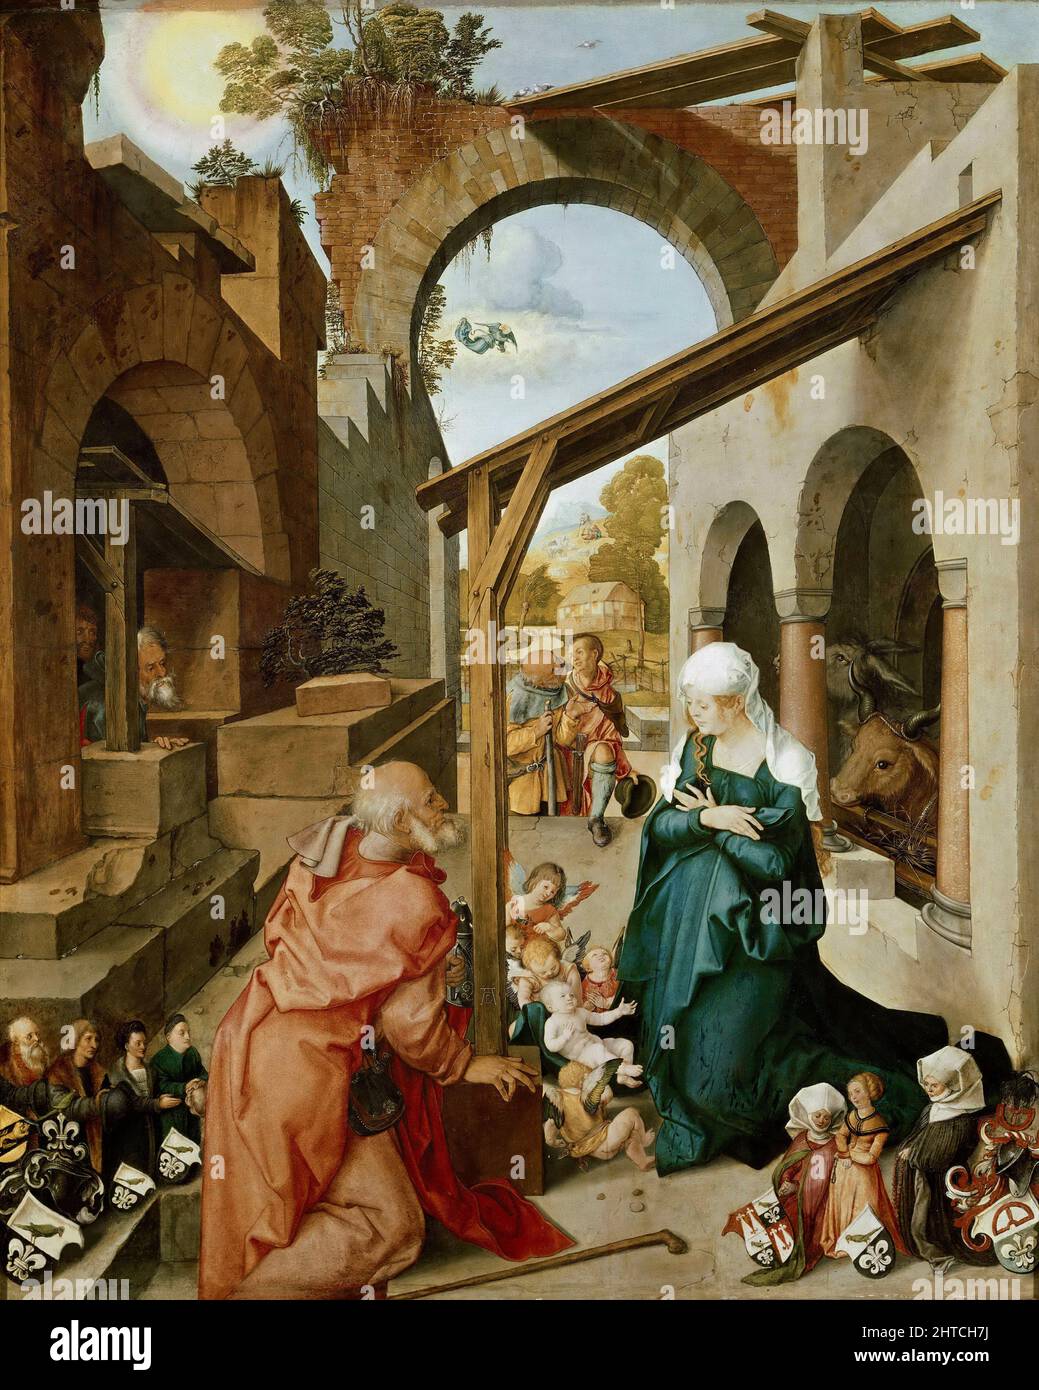 Paumgartner altarpiece, central panel: The Nativity of Christ, after 1503. Found in the Collection of the Alte Pinakothek, Munich. Stock Photo